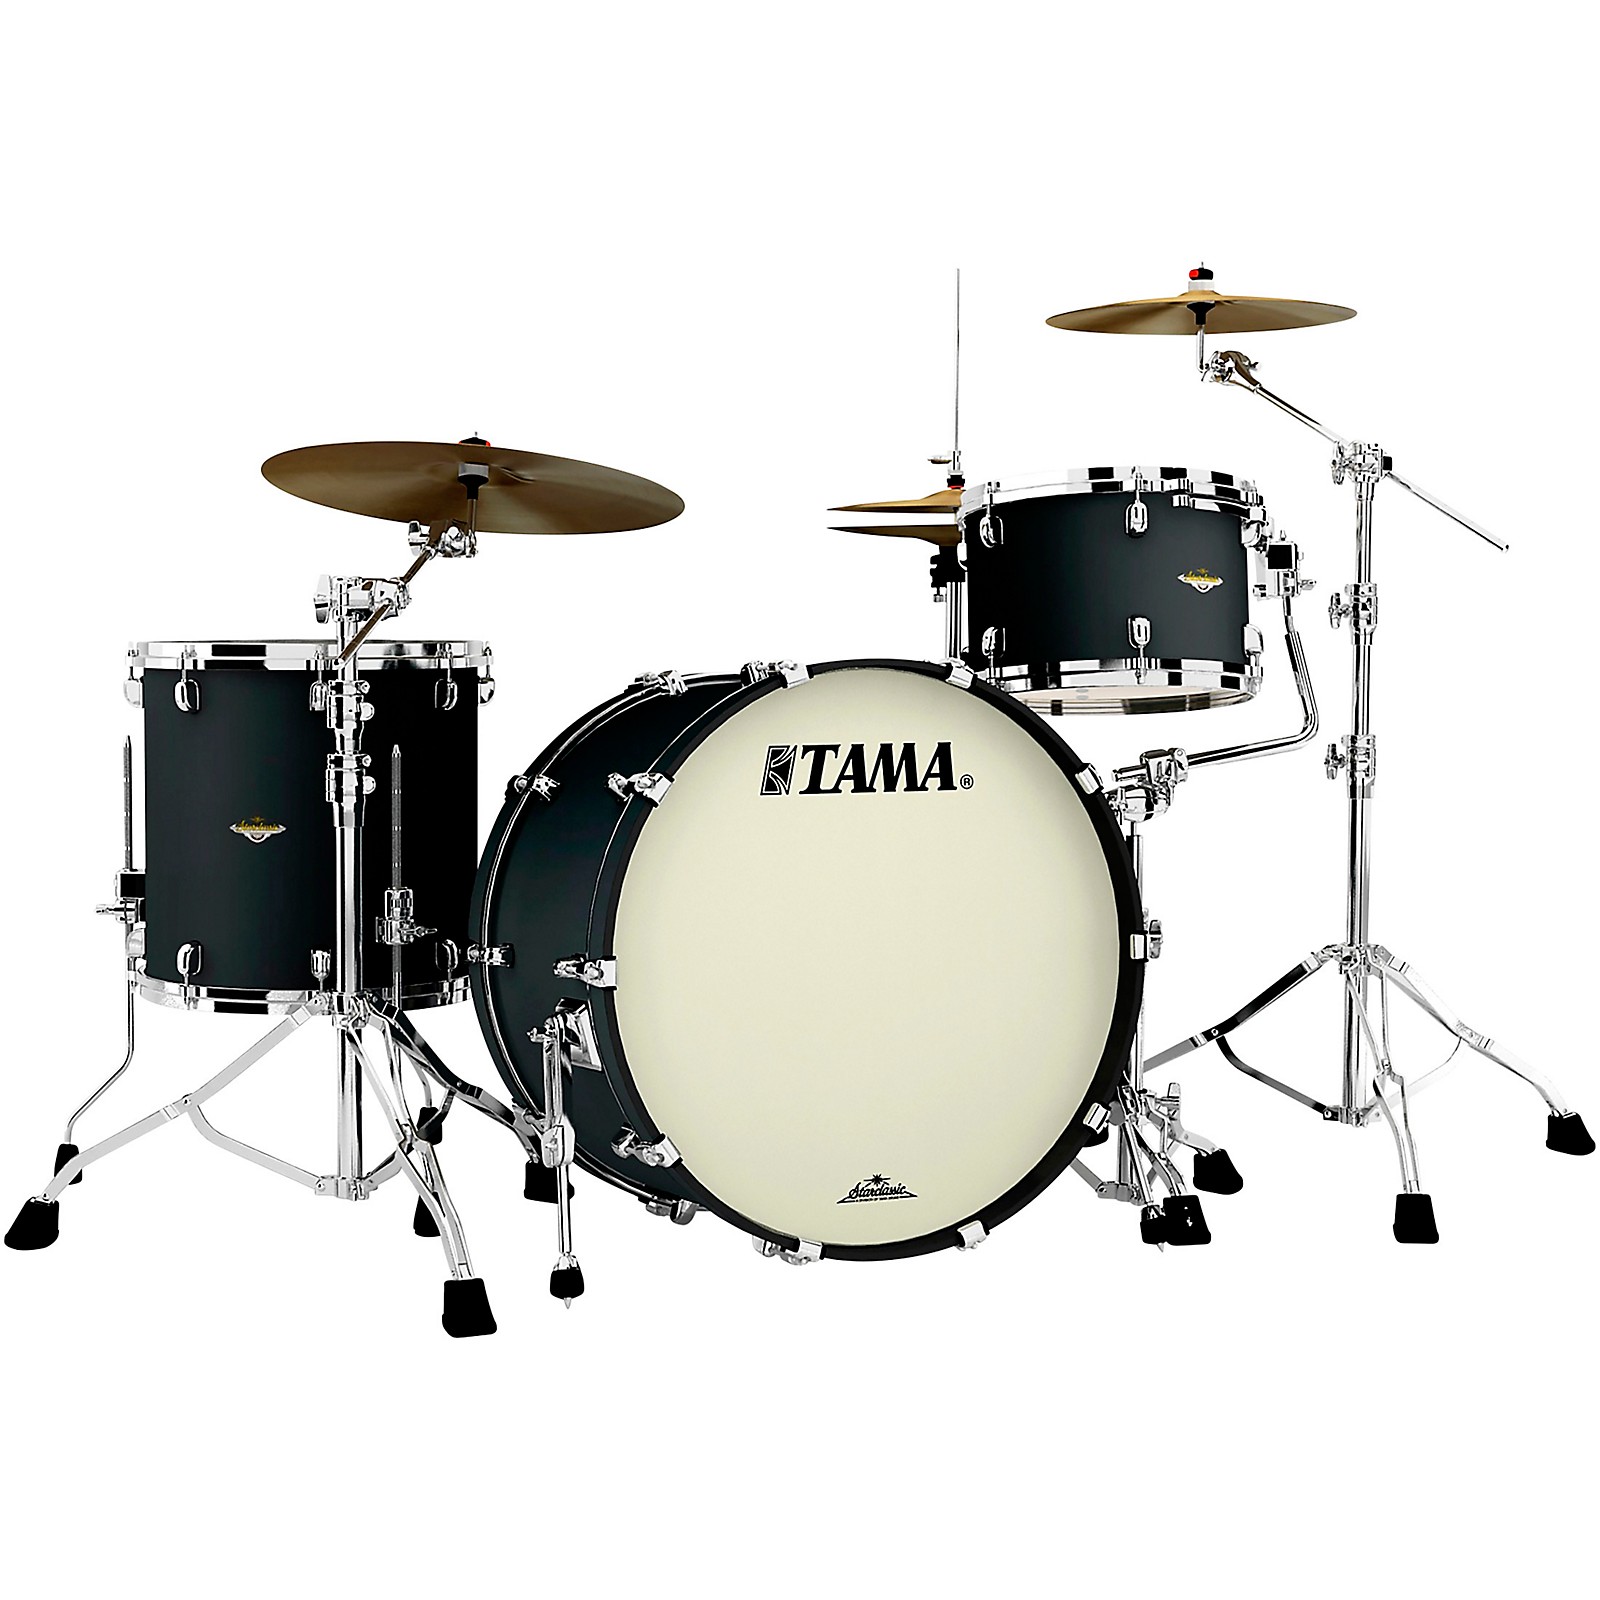 TAMA Starclassic Maple 3-Piece Shell Pack with Chrome Hardware and 24